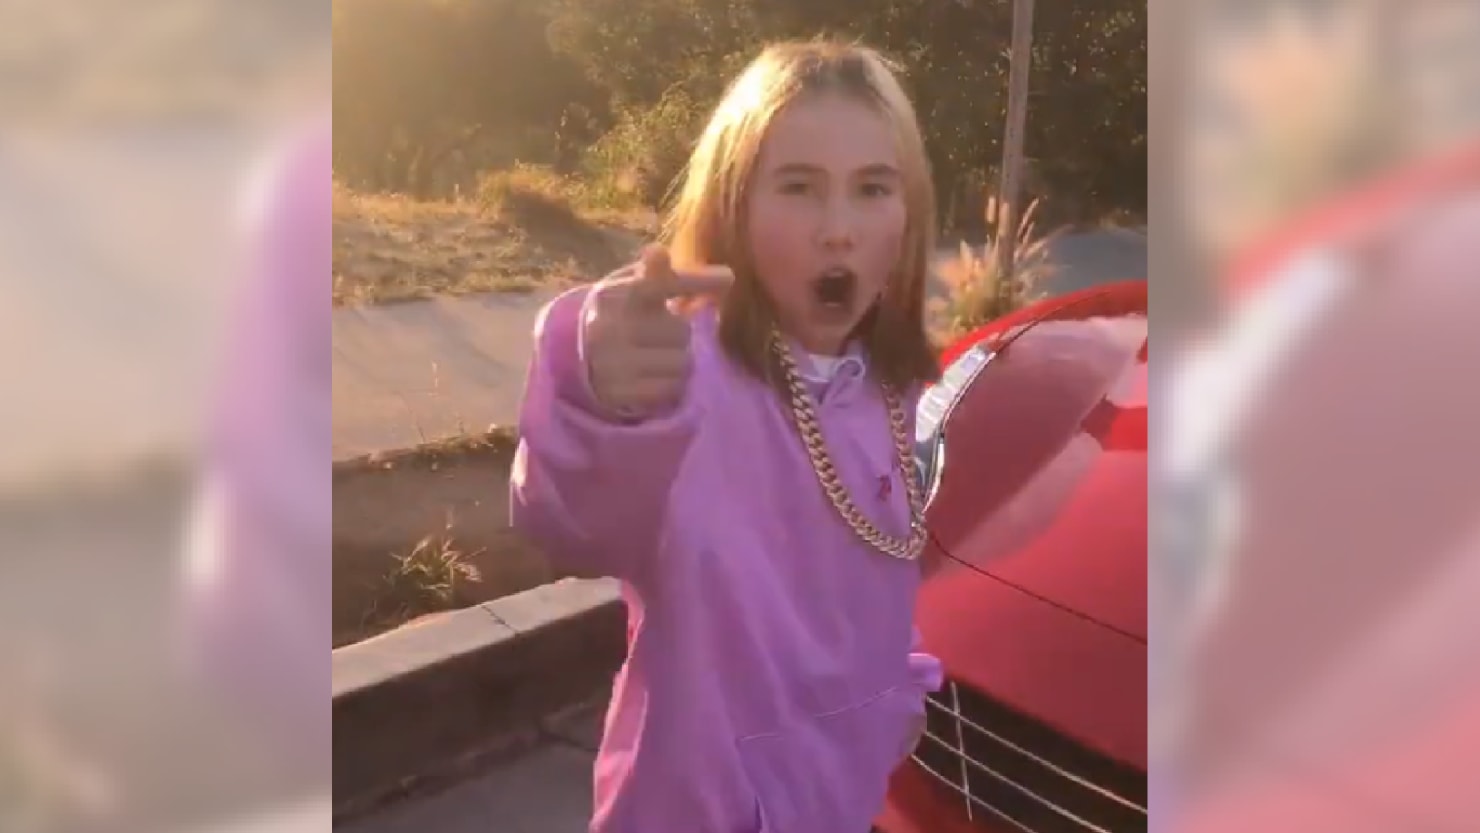 Lil Tay, Teen Internet Rapper, Has Sadly Passed Away - Find Out the Shocking Details! 13